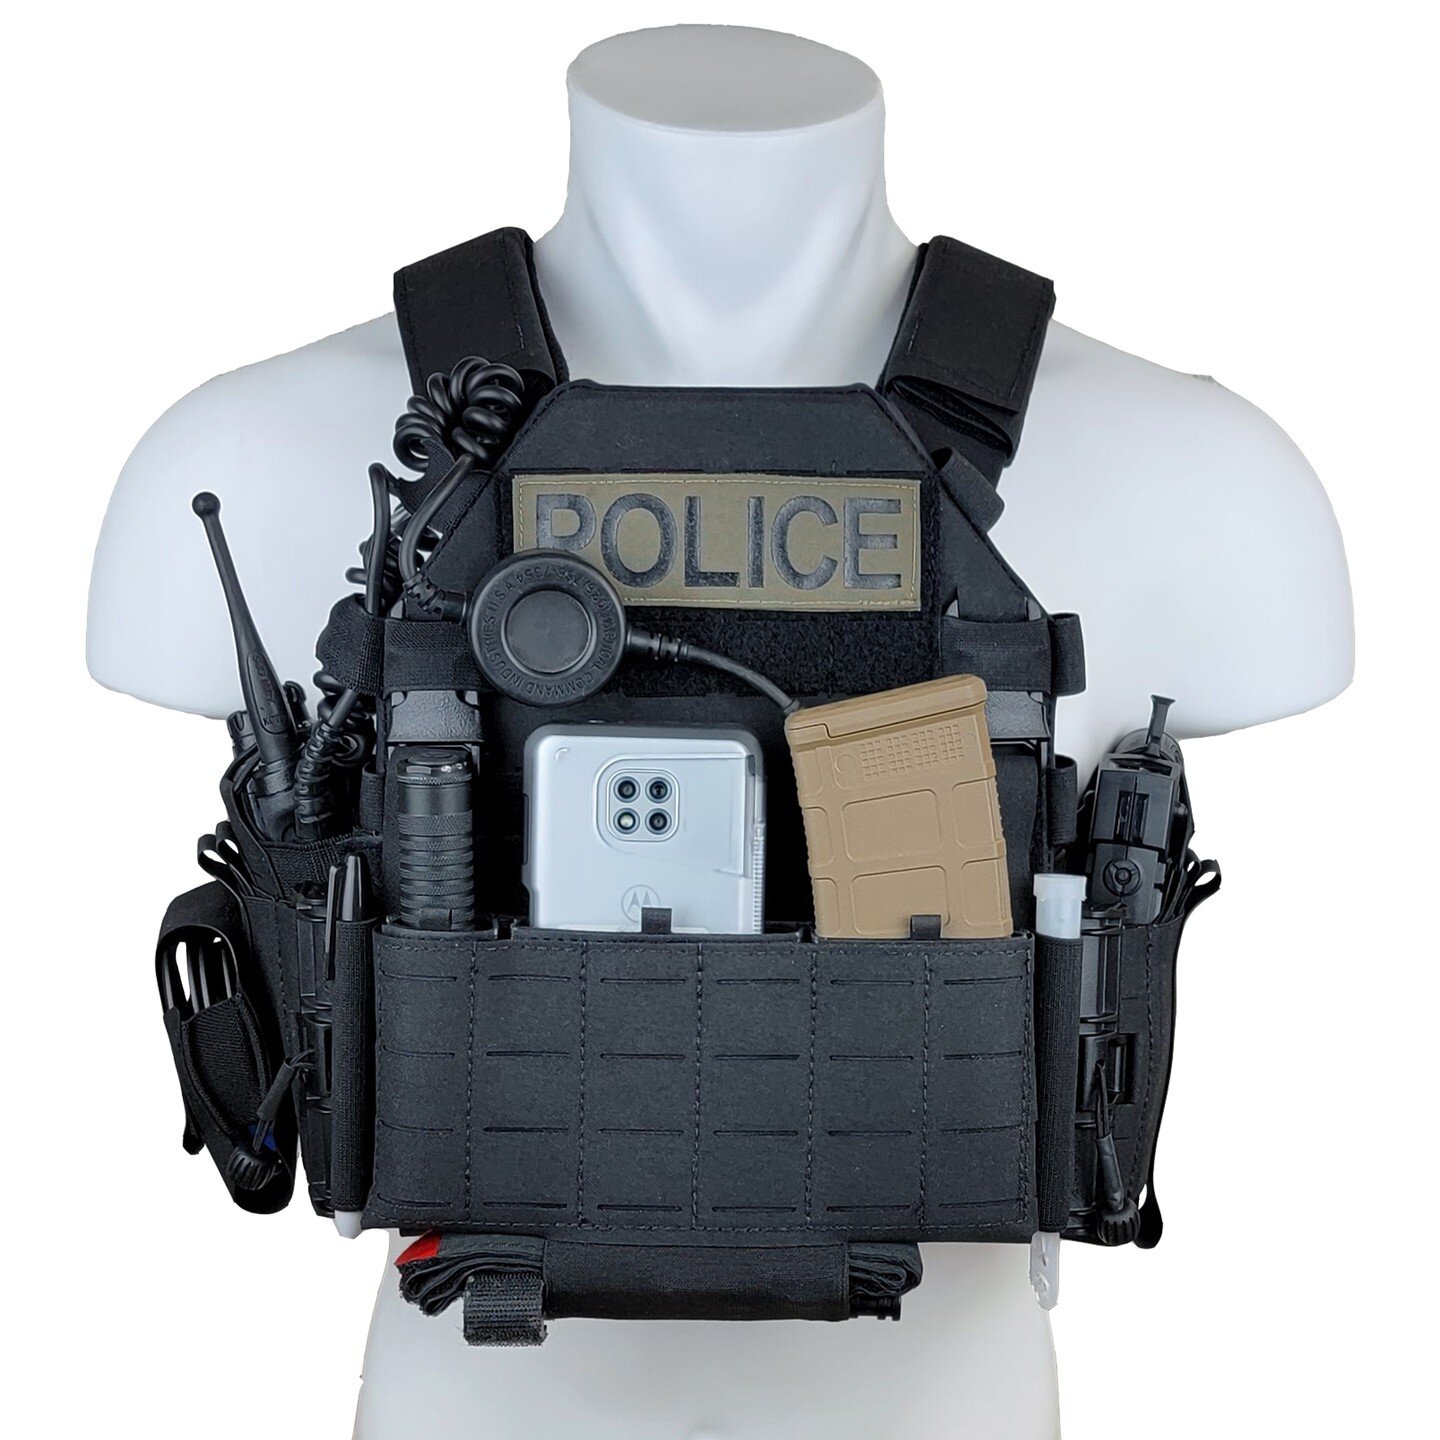 Rig for some Local LE with some cool things going on.

The Build:
-DPC Front Plate Bag (custom size)
-DPC Rear Plate Bag (custom size)
-Micro Molle Placard
-Custom Elastic Insert (Rifle, Body Cam, Pistol)
-Elastic Cummerbund (2.5 Section)
-Mag Wing L